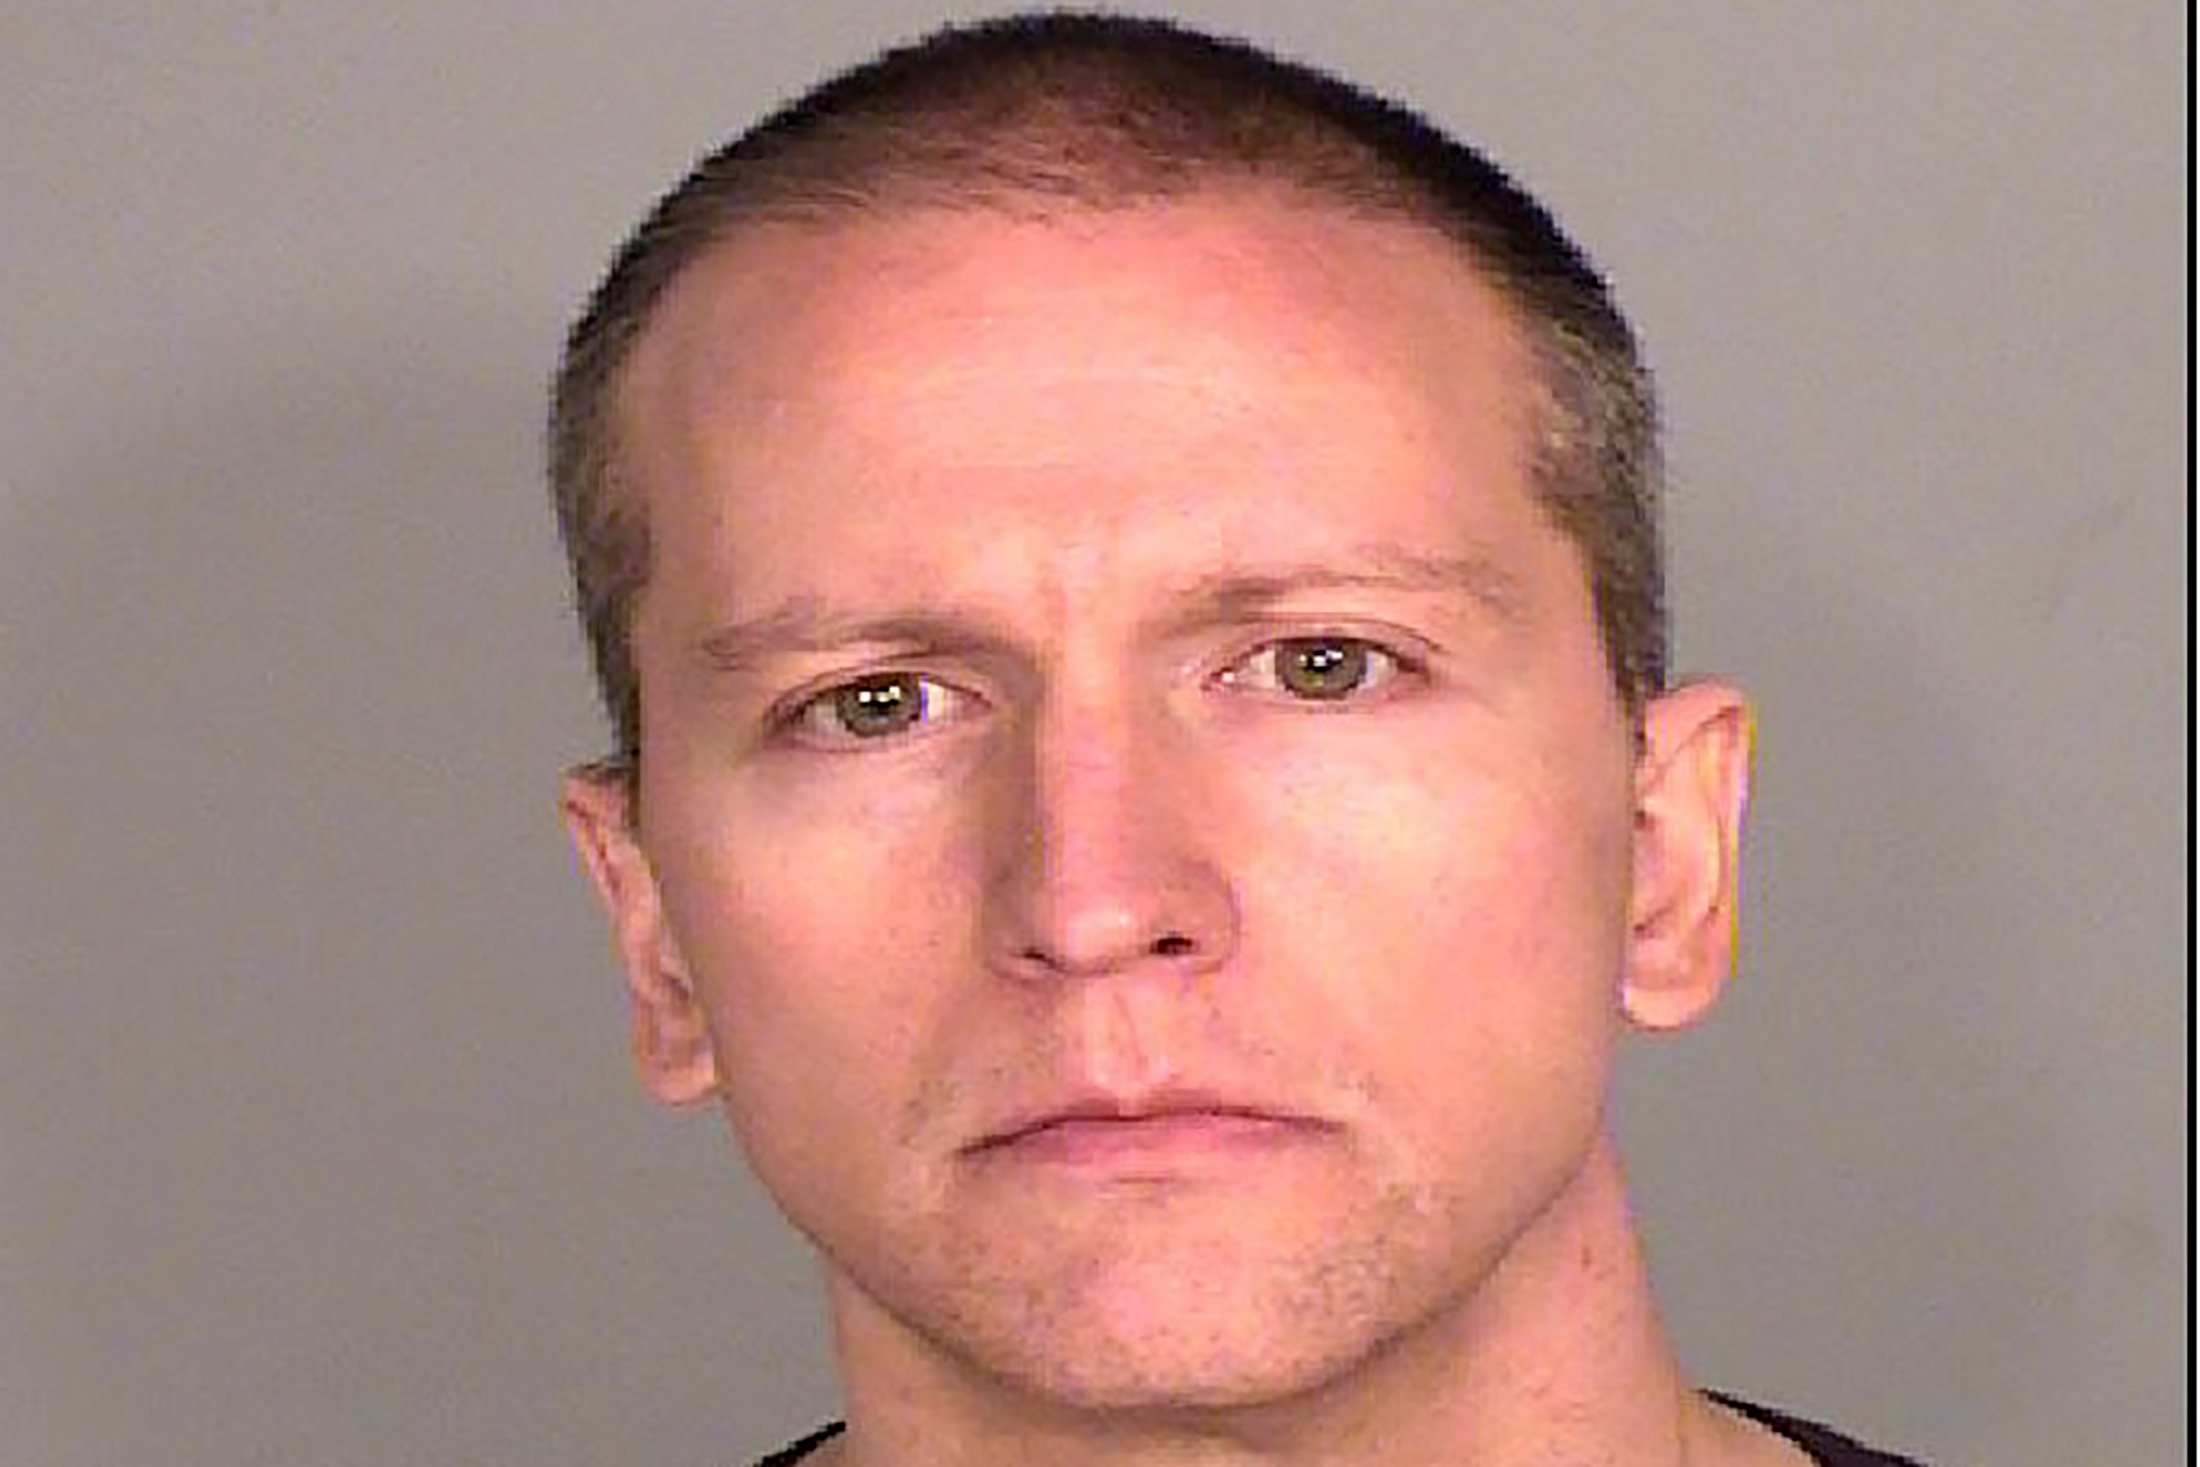 Former Minneapolis Police officer Derek Chauvin poses for a booking photograph at the Ramsey County Detention Center in St. Paul, Minnesota, U.S. May 29, 2020. Ramsey County Detention Center/Handout via REUTERS.